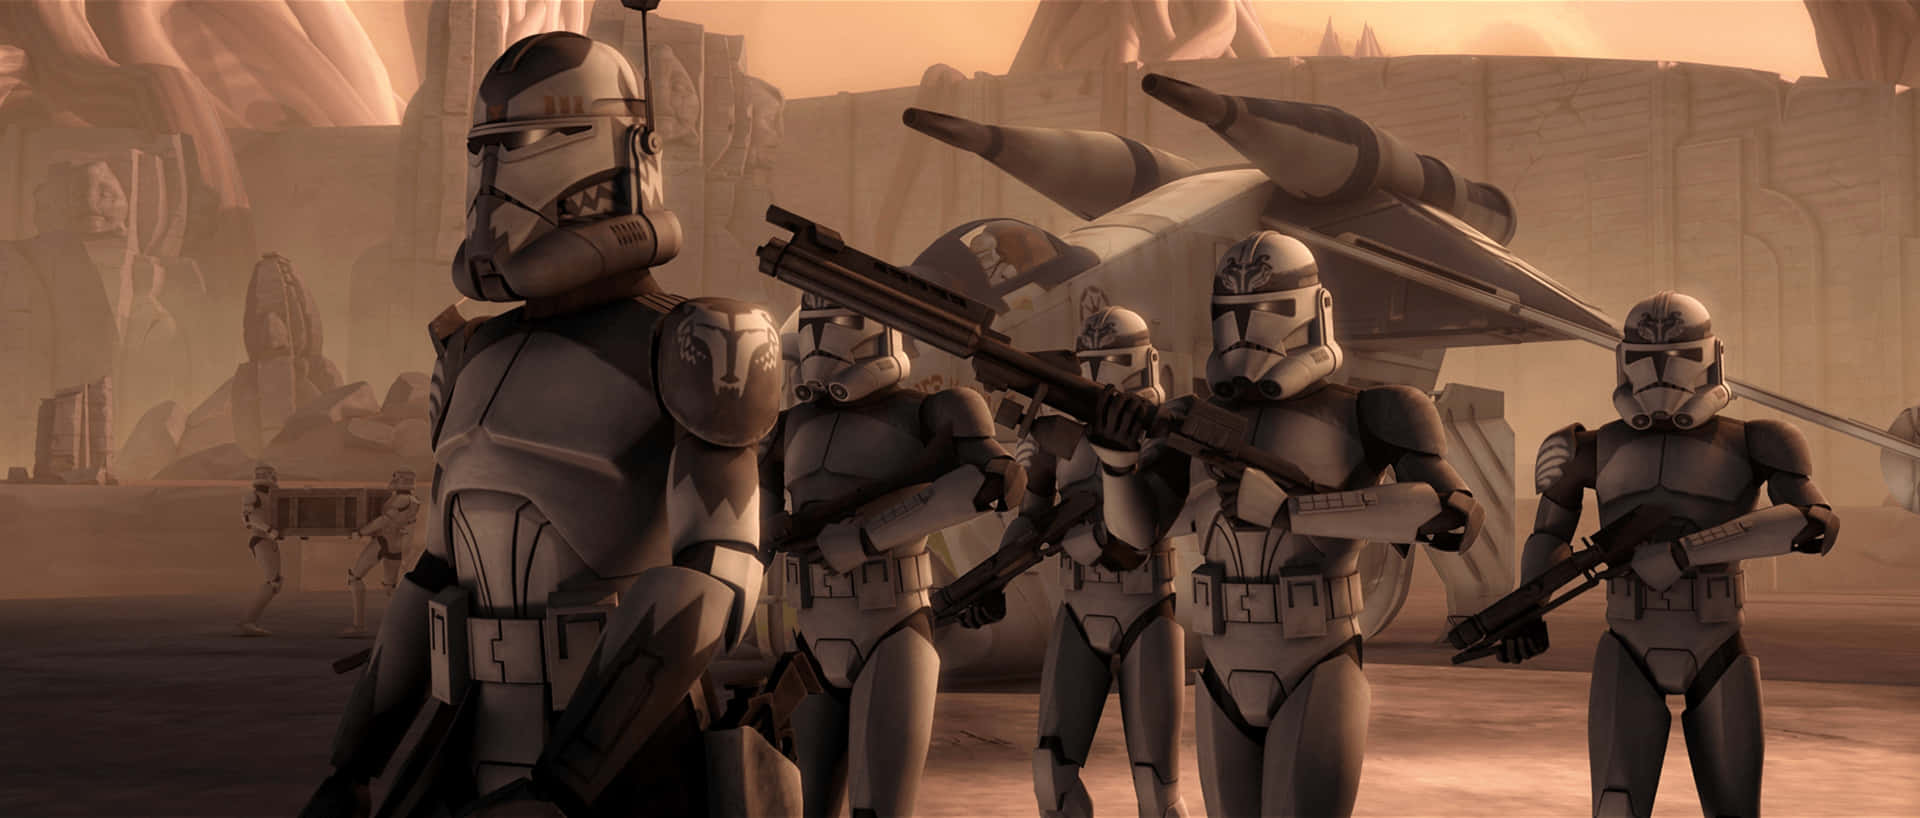 Star Wars Clone Troopers The Clone Wars Background